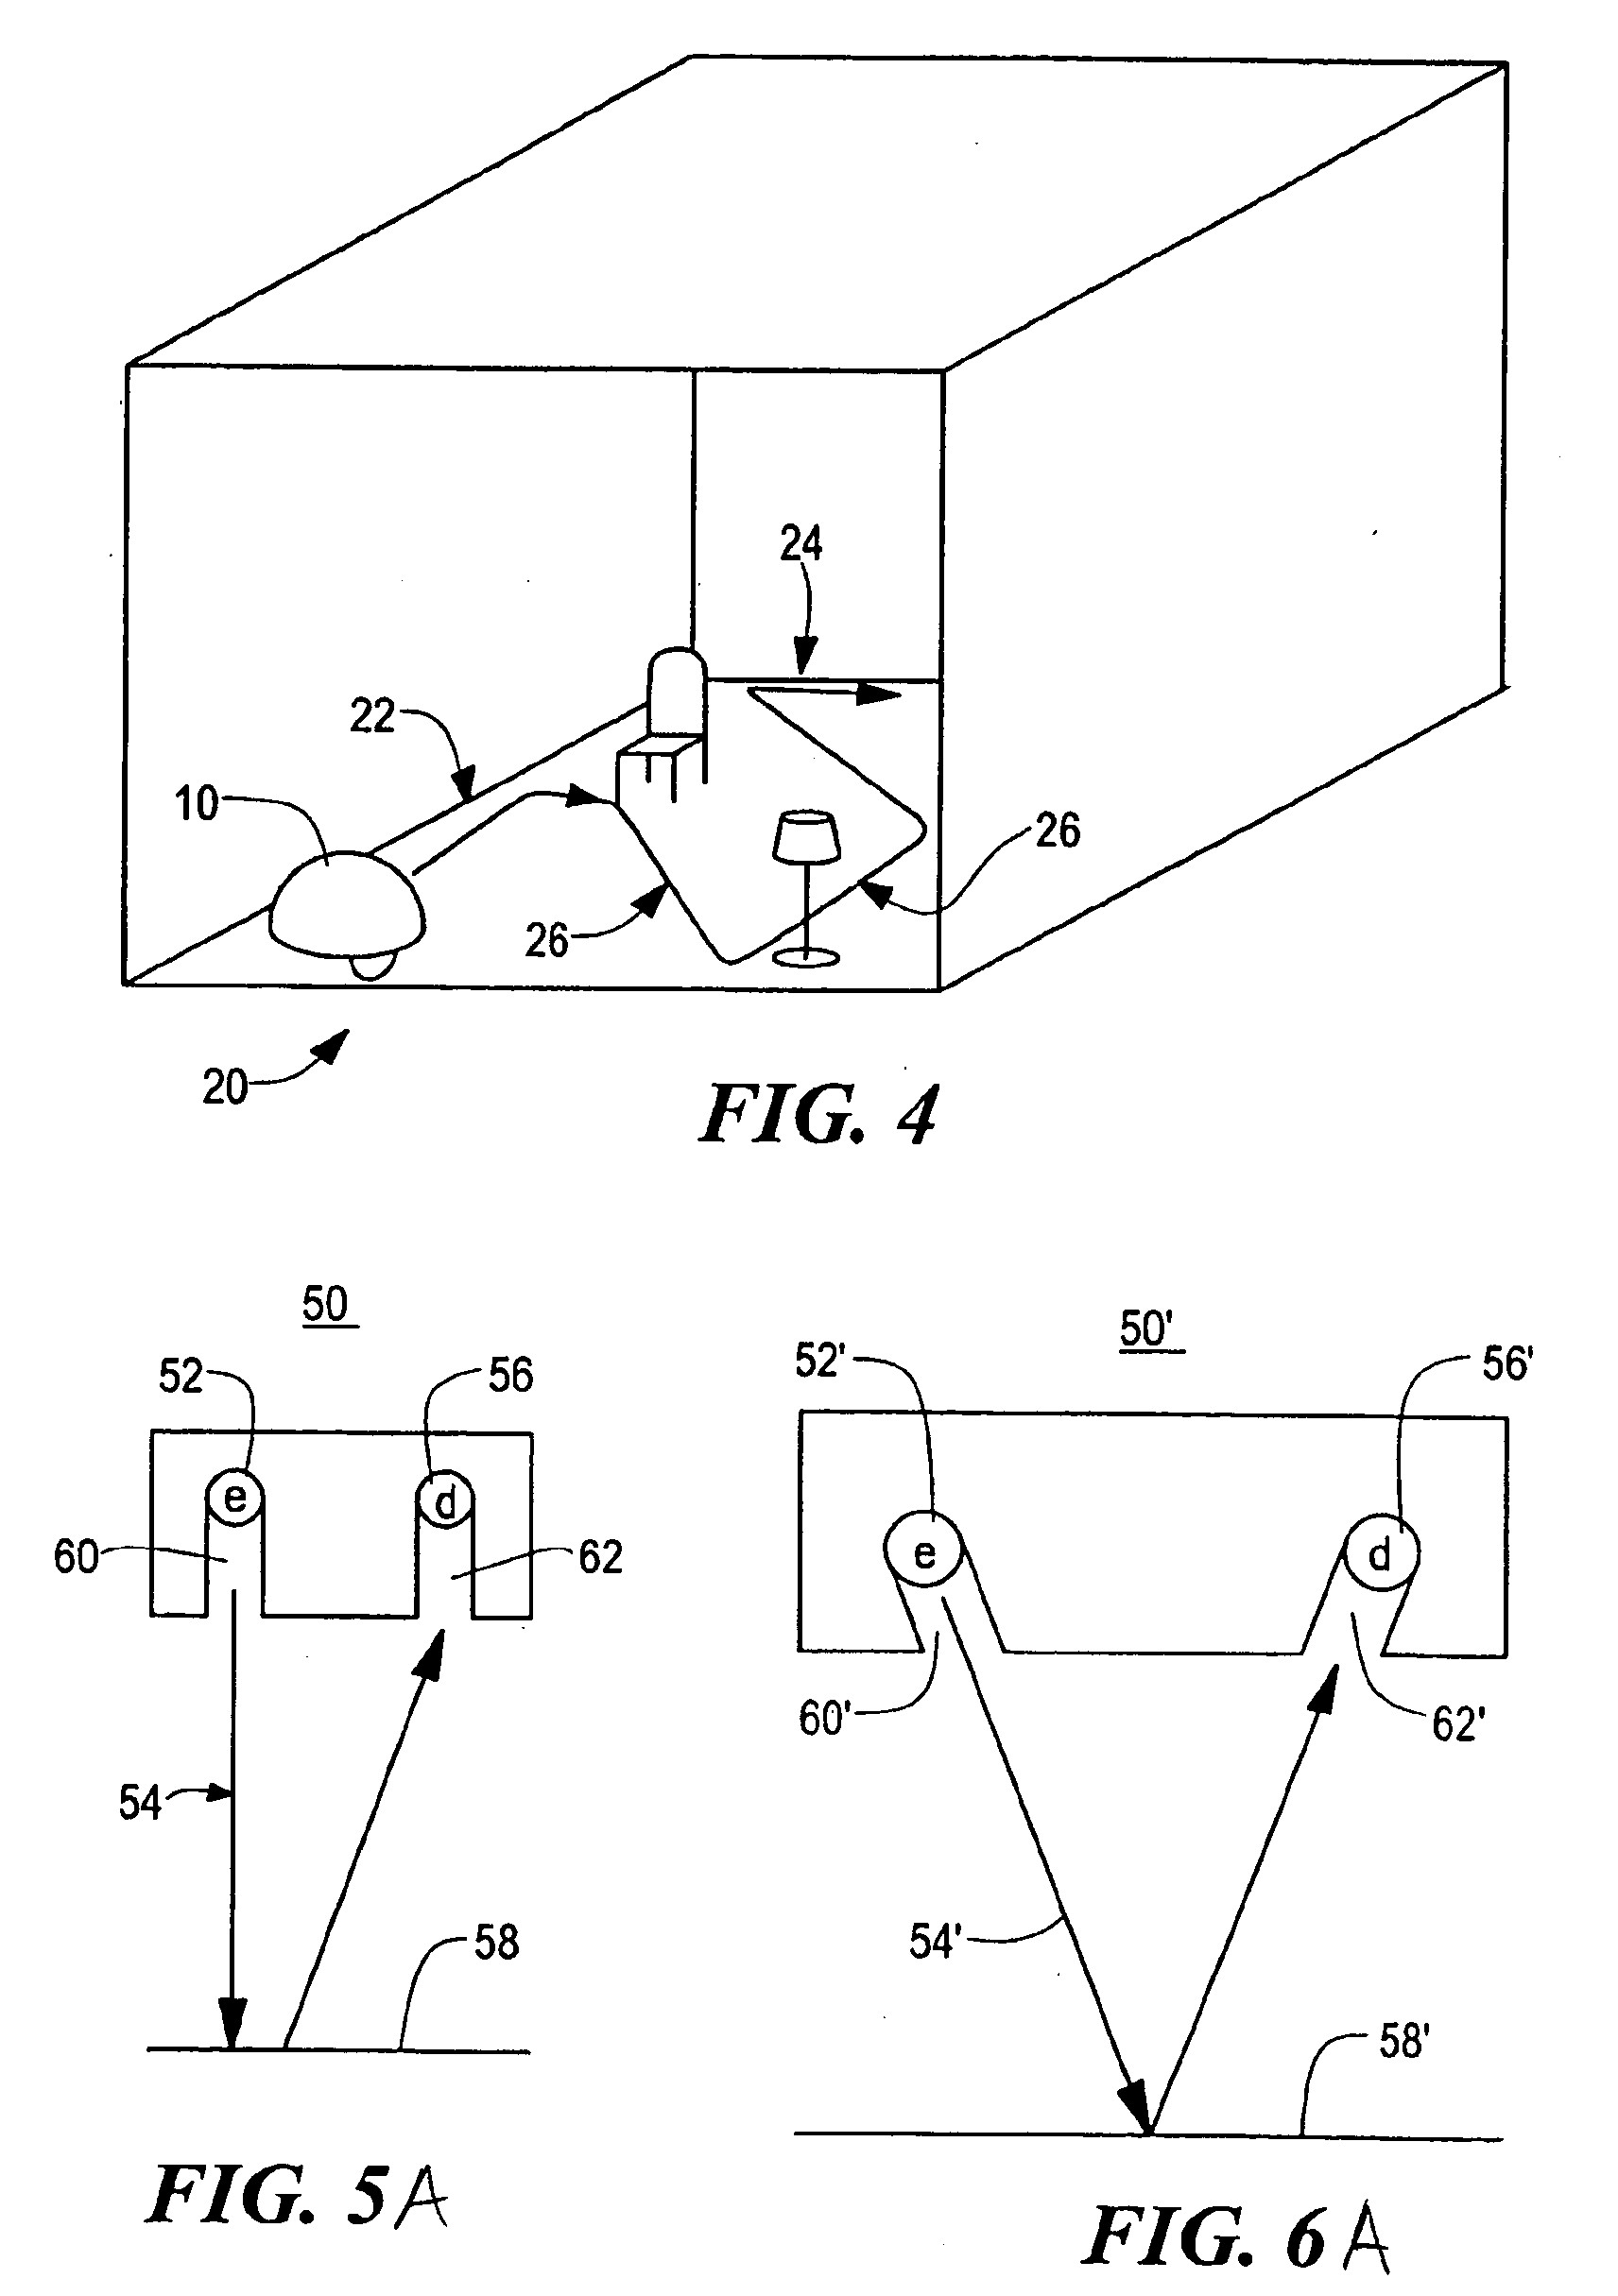 Obstacle following sensor scheme for a mobile robot